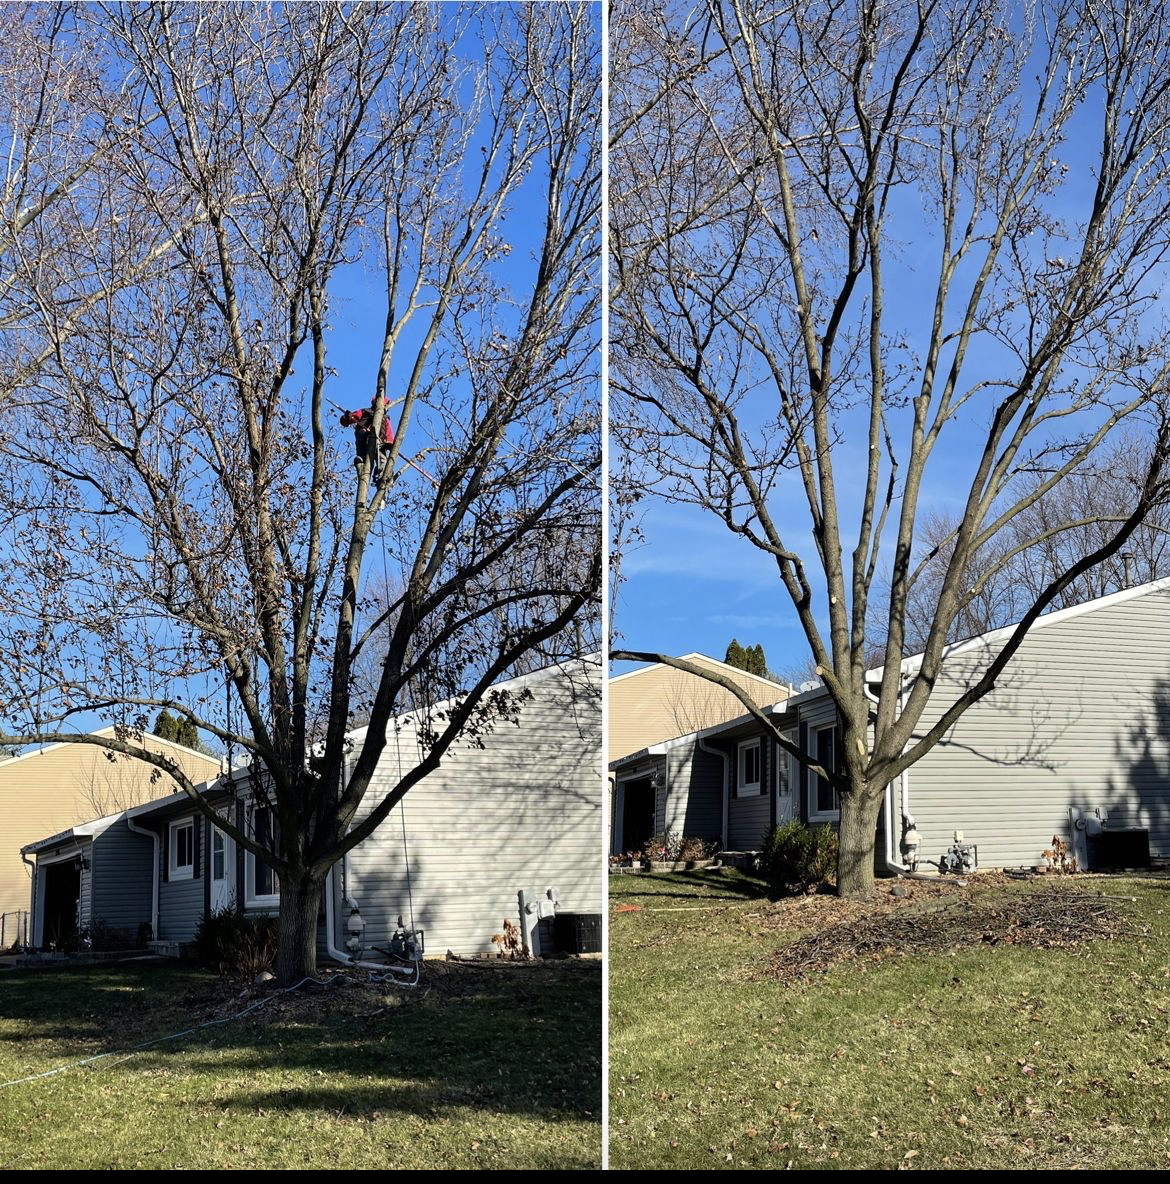 Tree trimming in St Charles IL